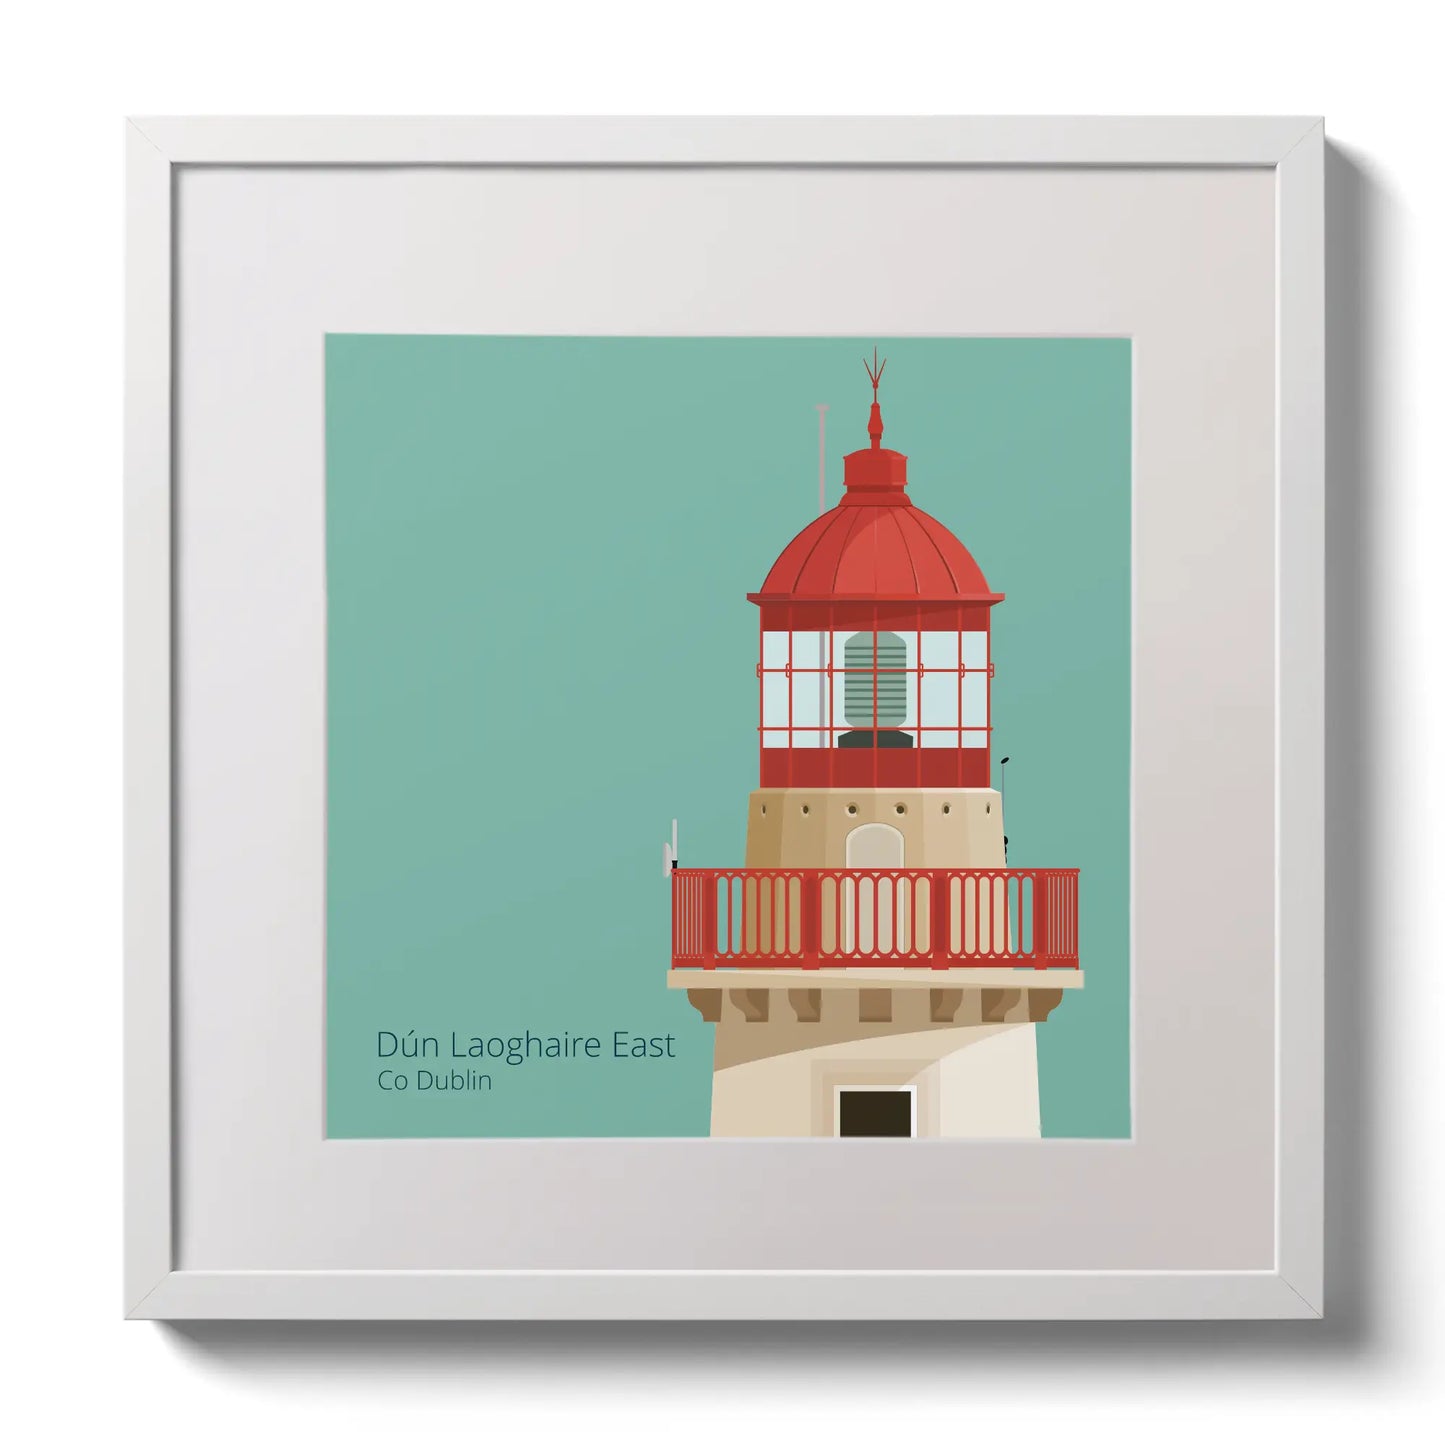 Illustration of Dún Laoghaire East lighthouse on an ocean green background,  in a white square frame measuring 30x30cm.